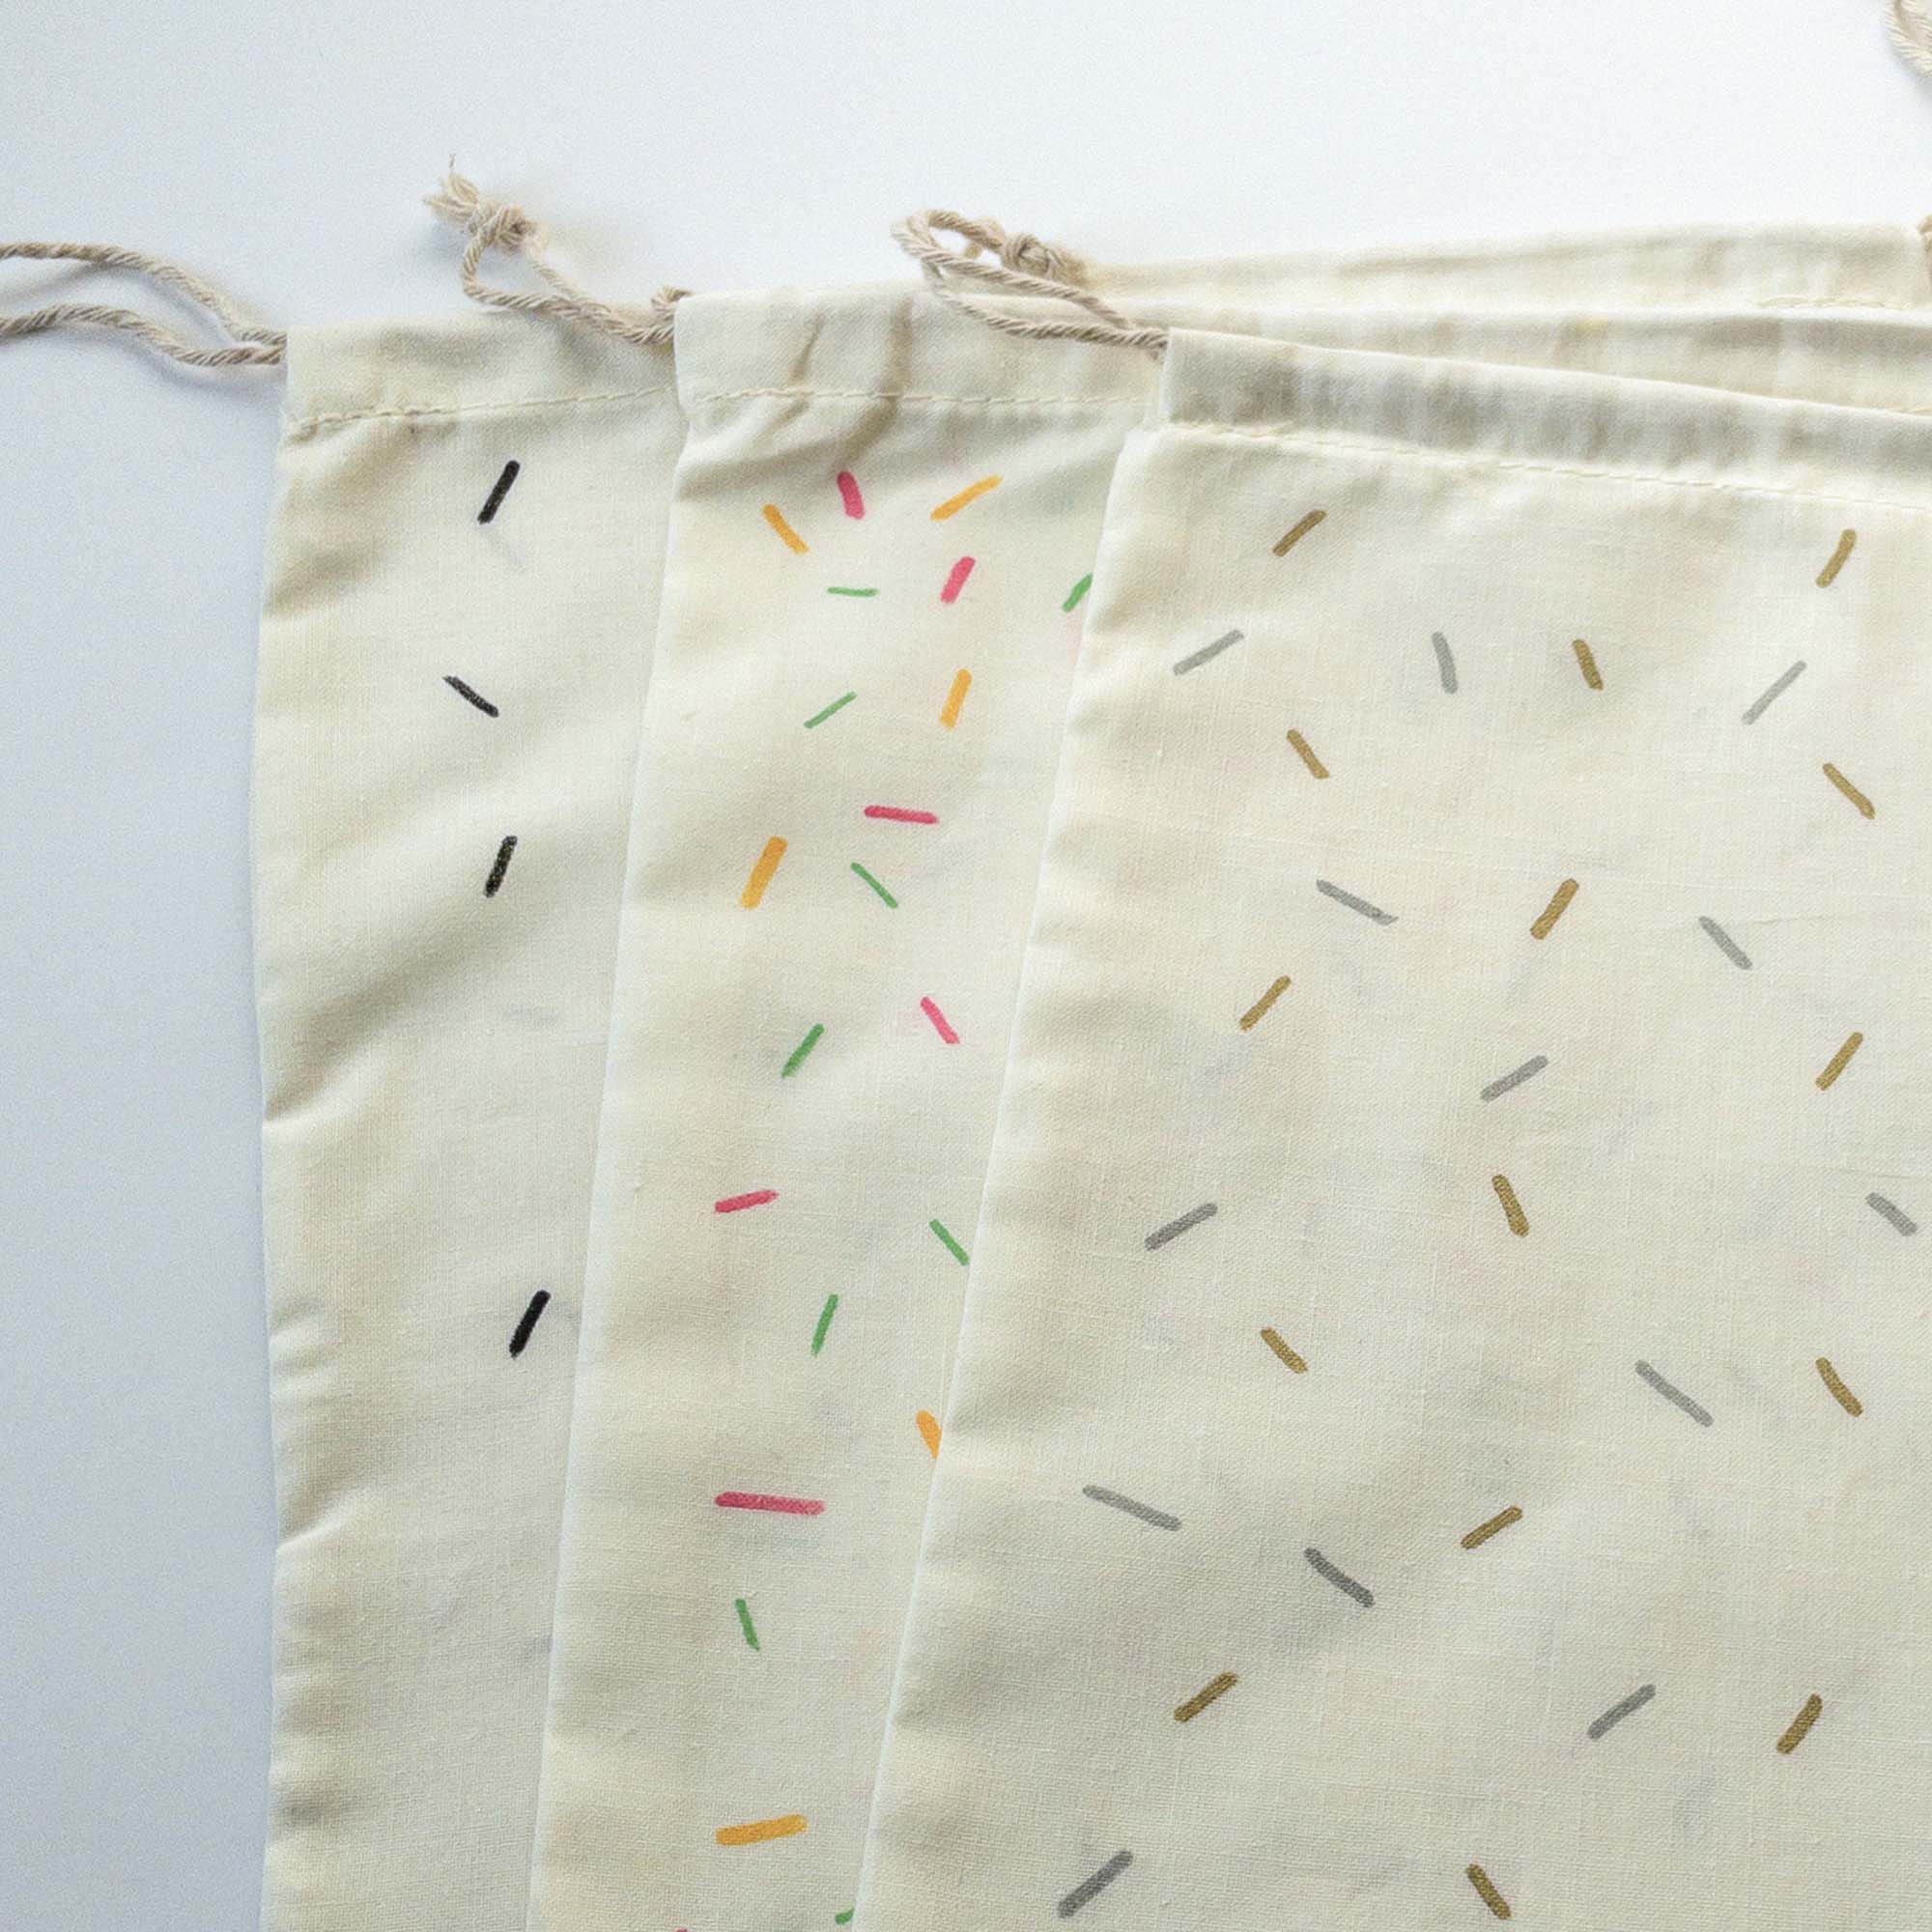 Eco-friendly fabric reusable drawstring pouches in three hand painted confetti patterns -- one in pink, green, and yellow; another in black and white; and the third in metallic gold and silver